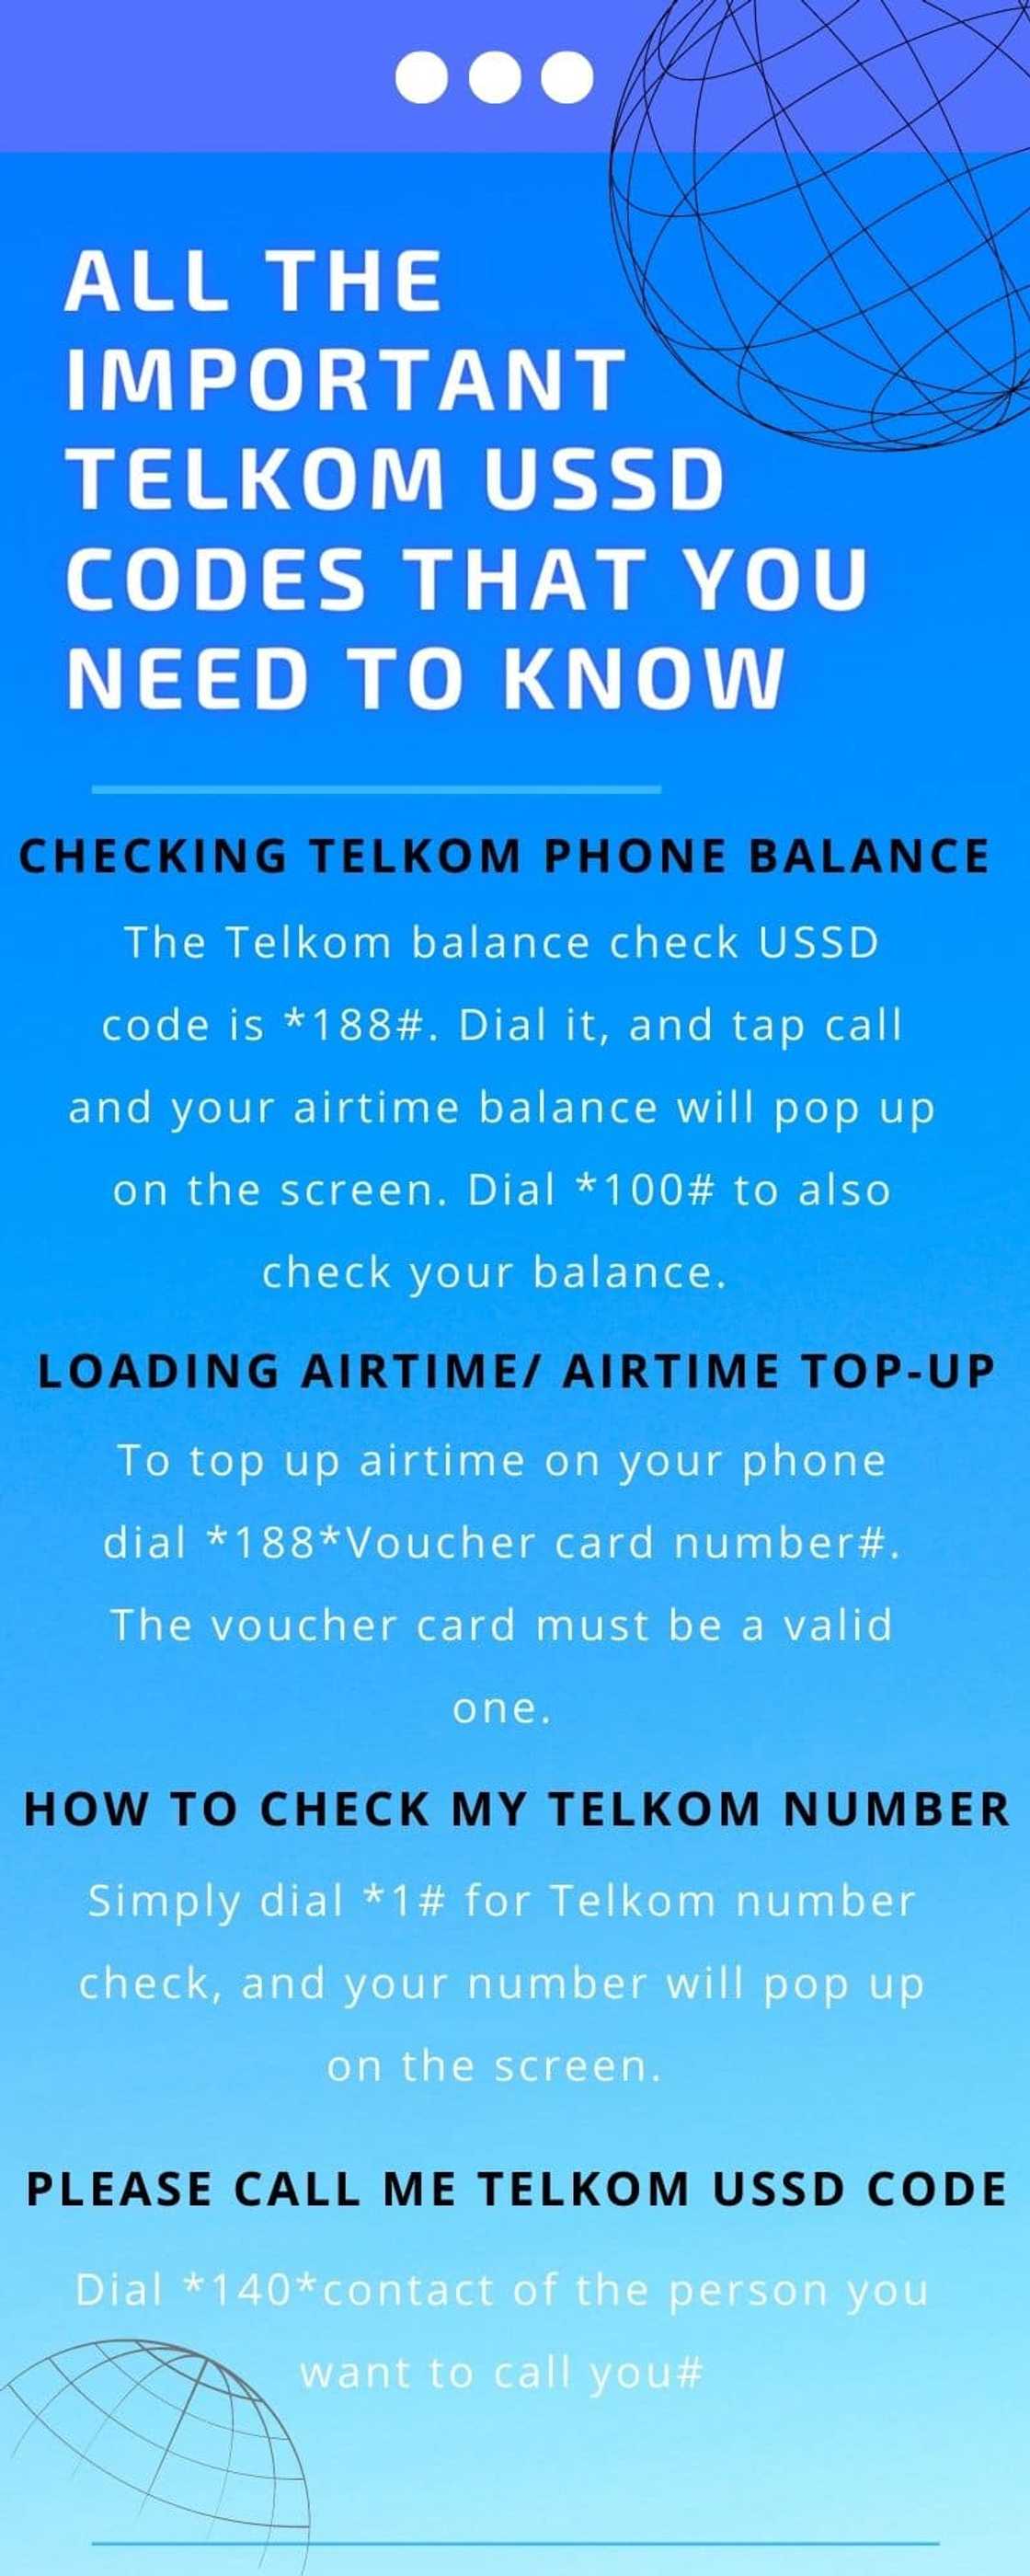 Telkom USSD codes you should know